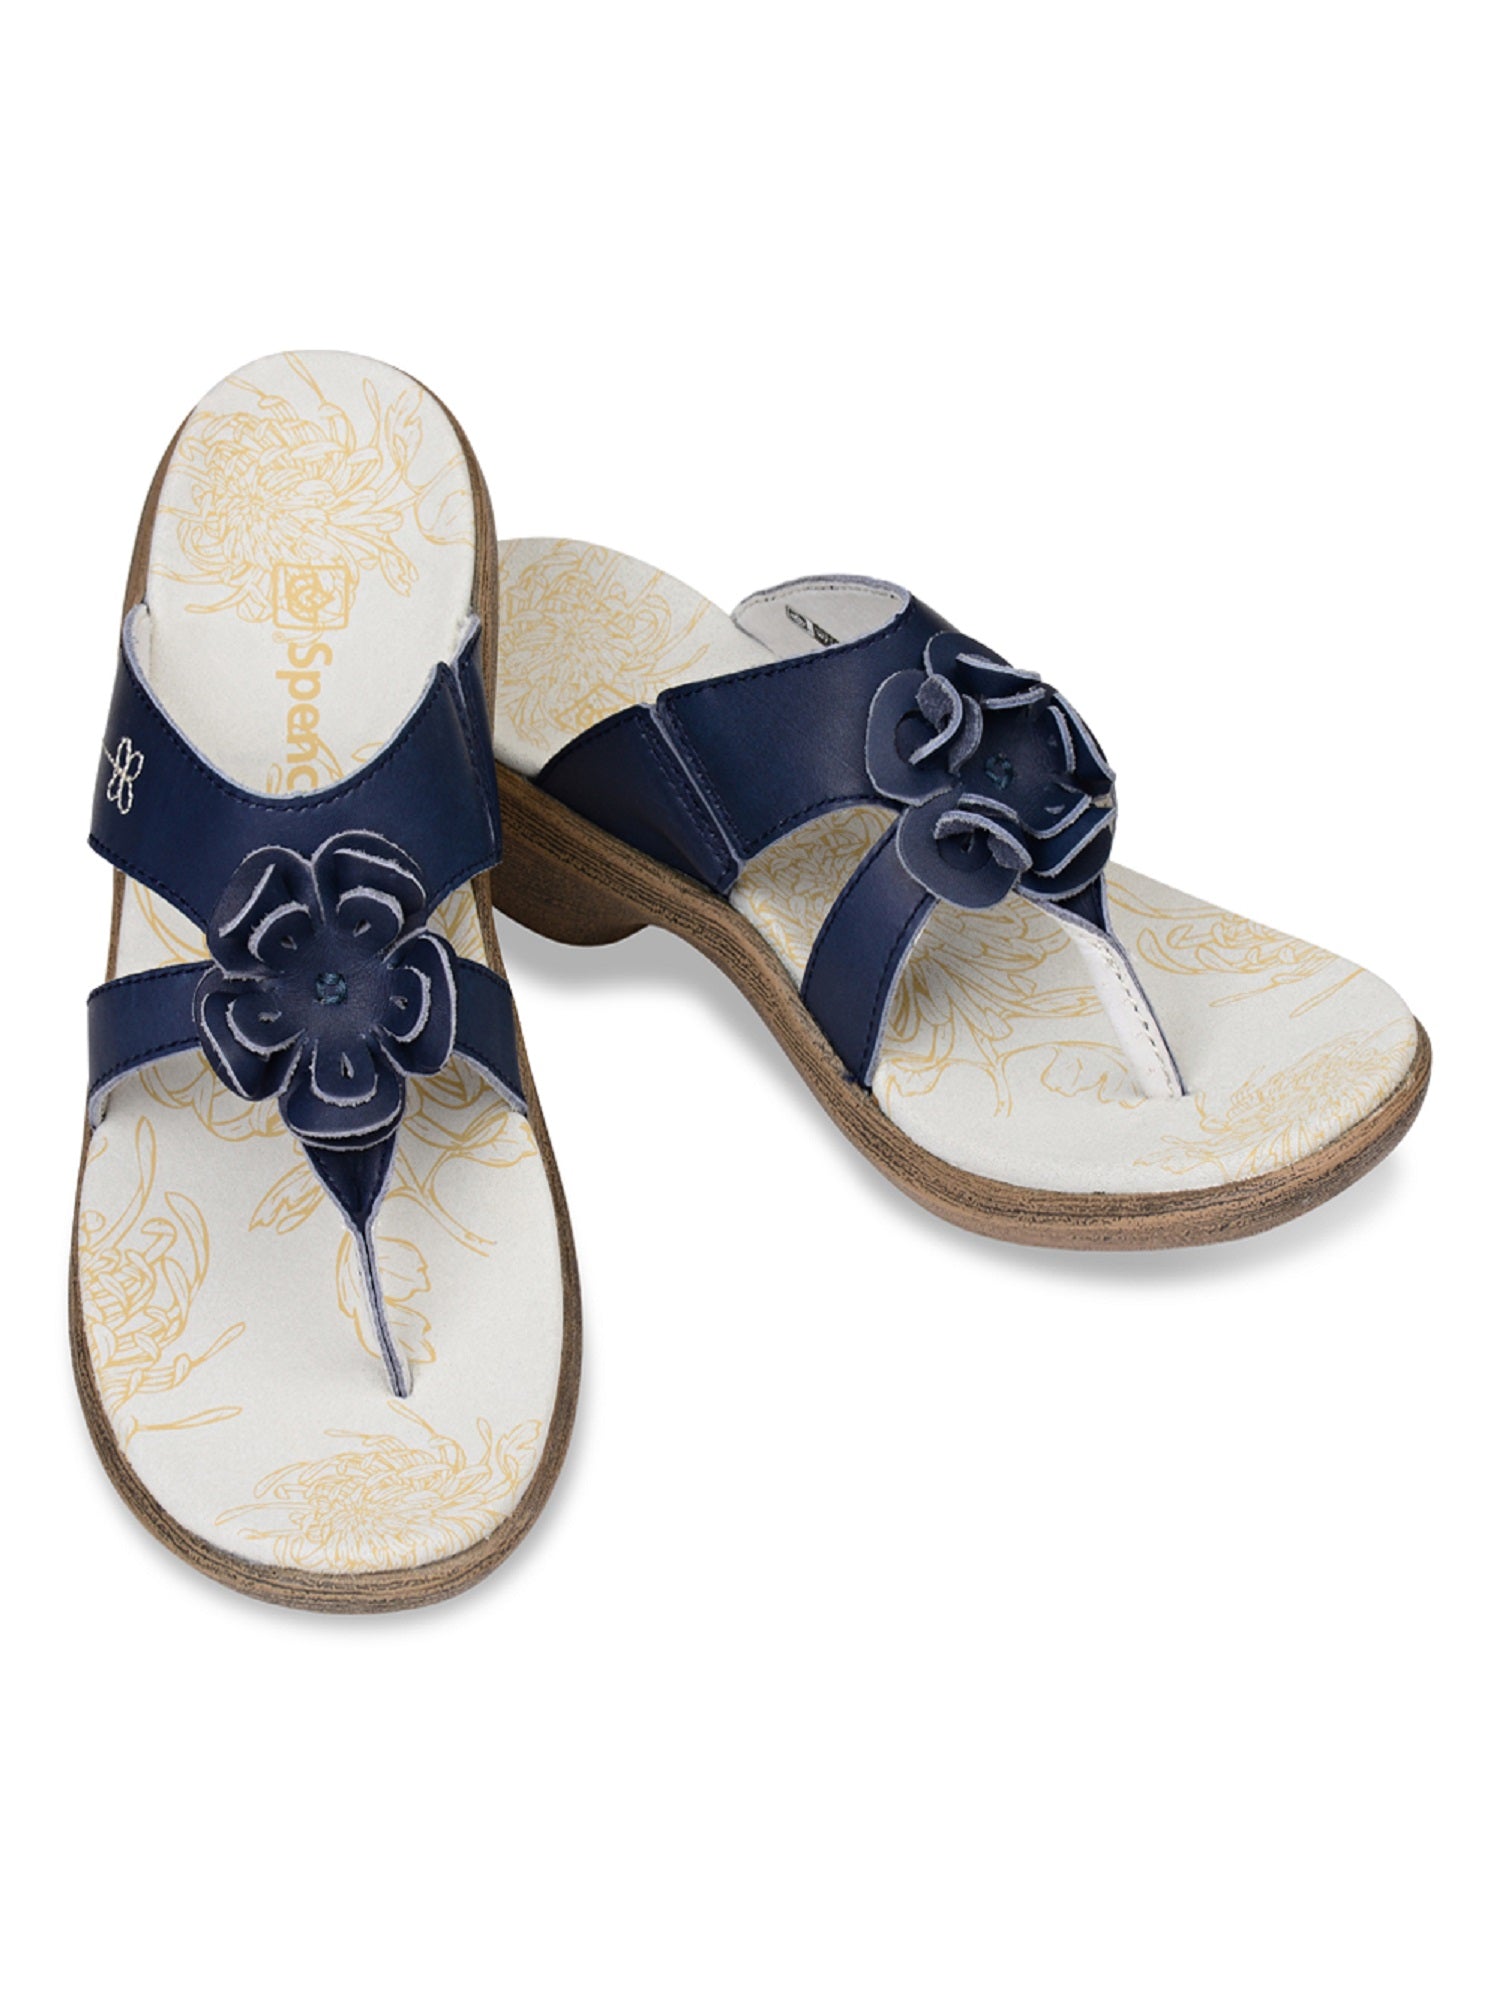 Spenco Rose - Supportive Casual Sandals - Navy Women's - Size 7